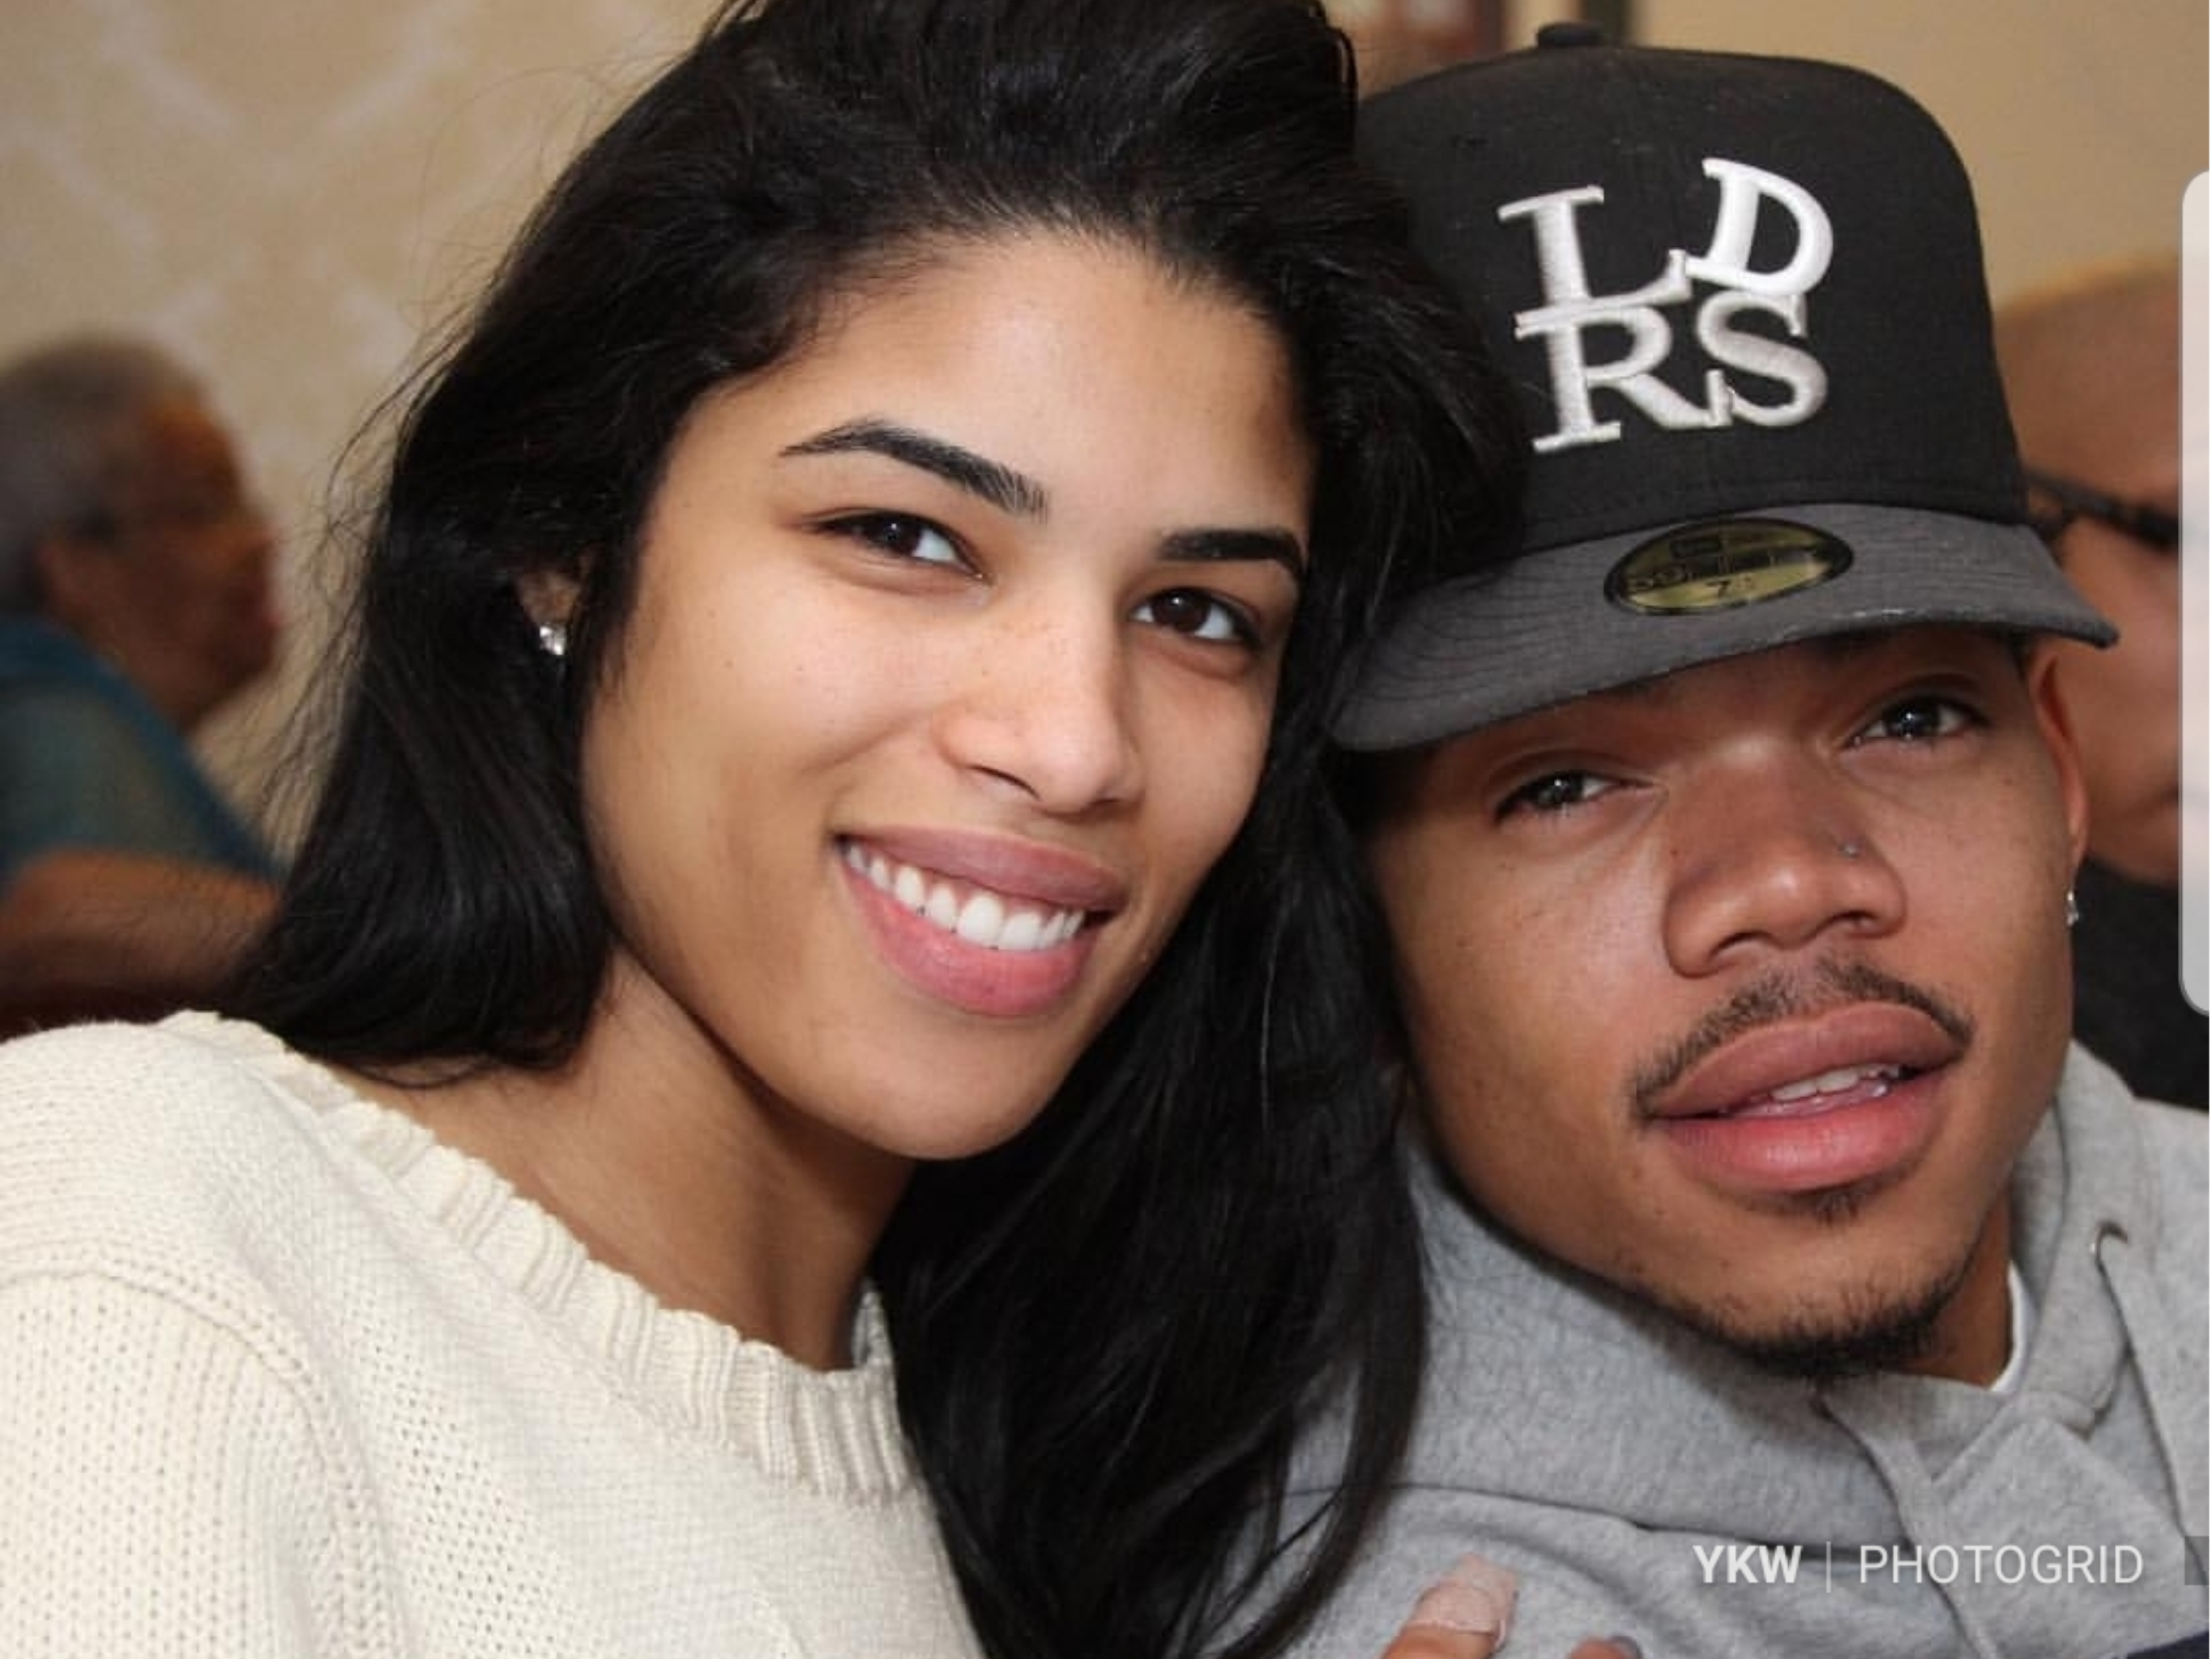 Chance The Rapper And Wife Kirsten Bennett Welcome Second Baby Girl!